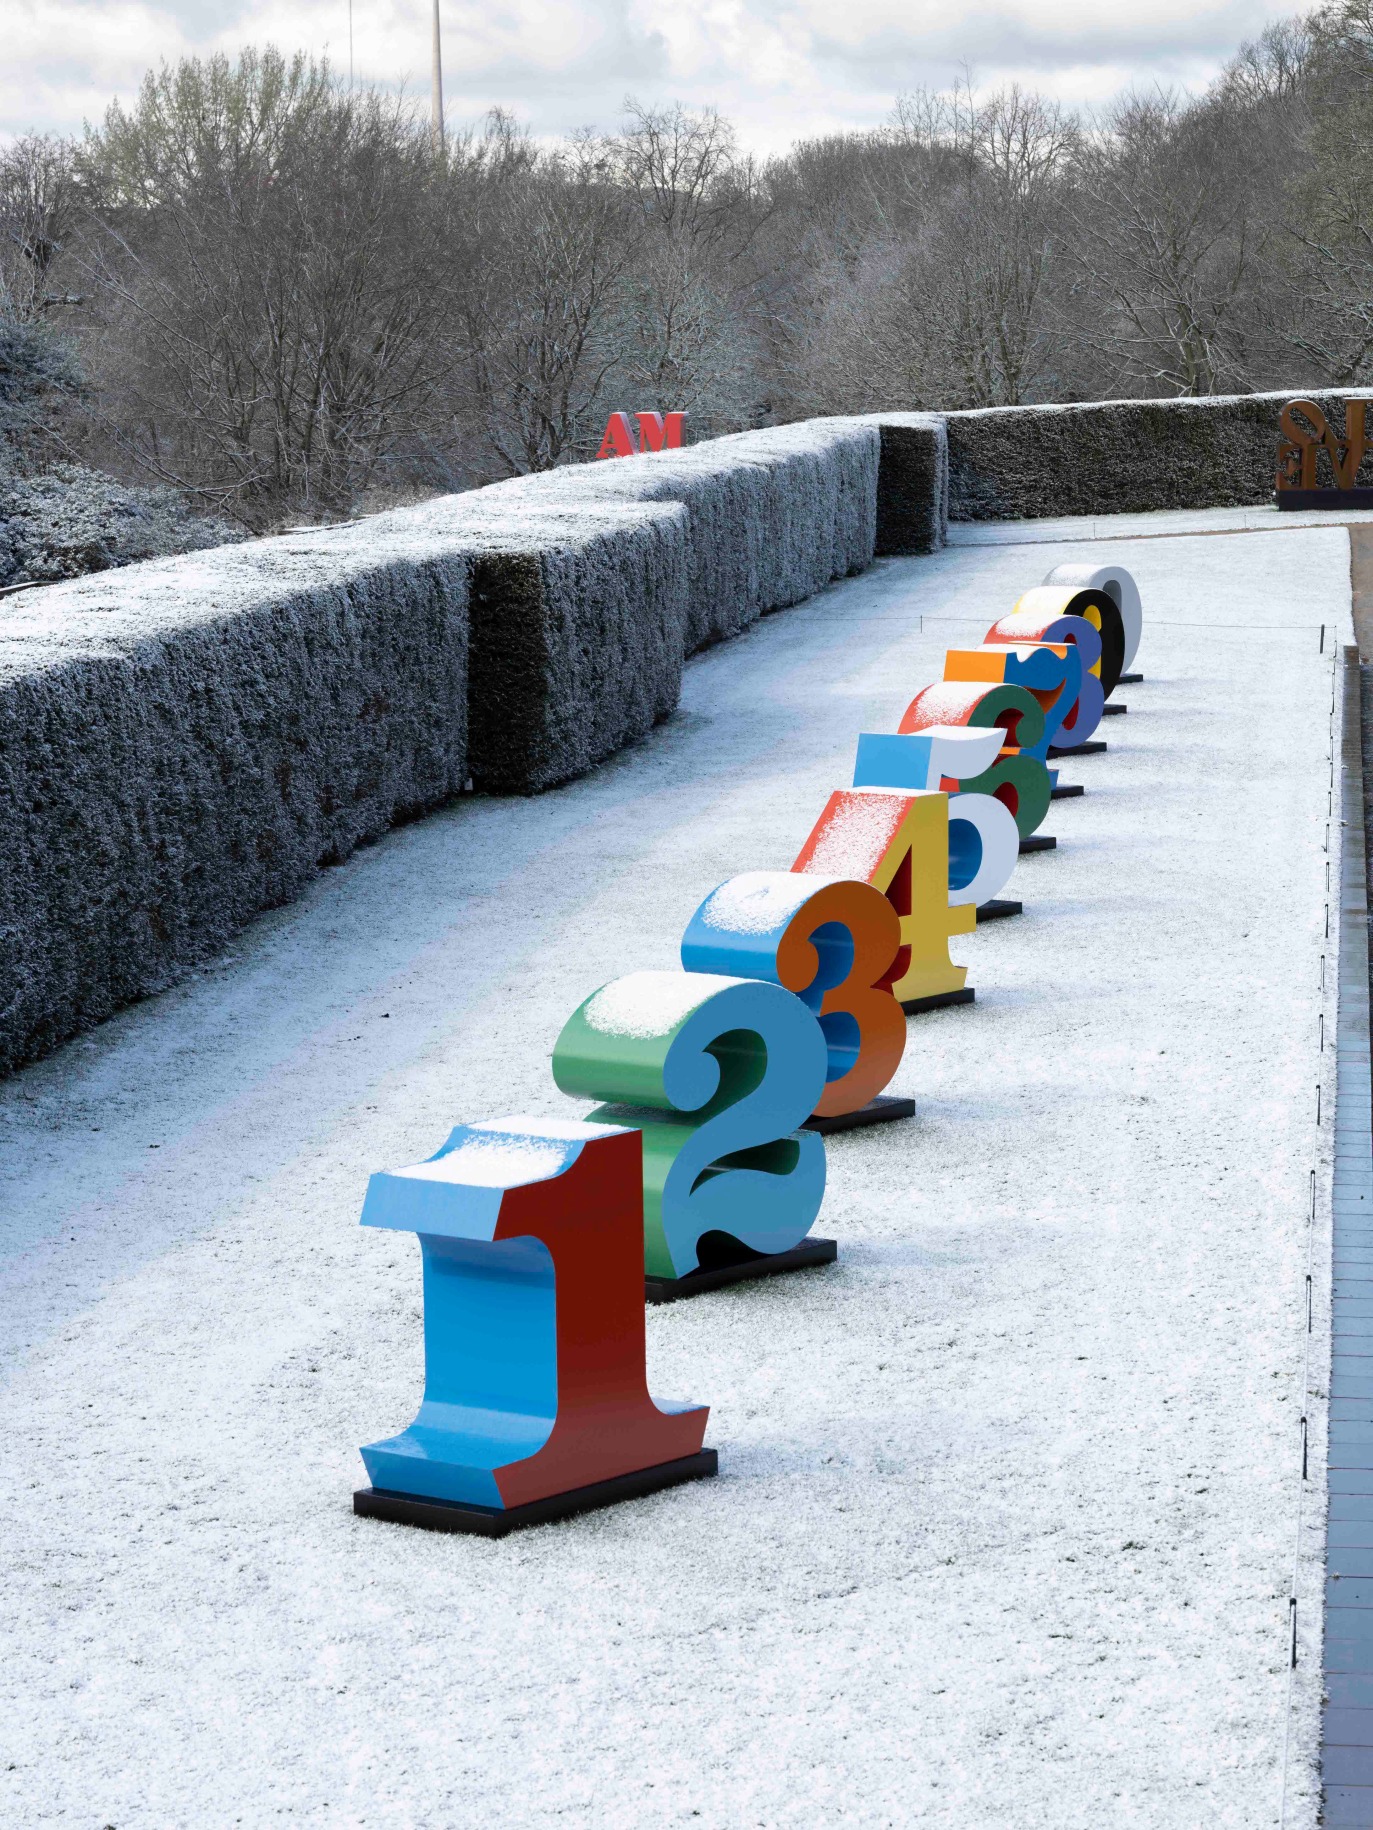 Installation view of Indiana&#039;s 6-foot ONE Through ZERO (The Ten Numbers)&nbsp;(1980&ndash;2001) in&nbsp;Robert Indiana: Sculpture 1958-2018, Yorkshire Sculpture Park, Wakefield, March 12, 2022&ndash;January 8, 2023, &nbsp;